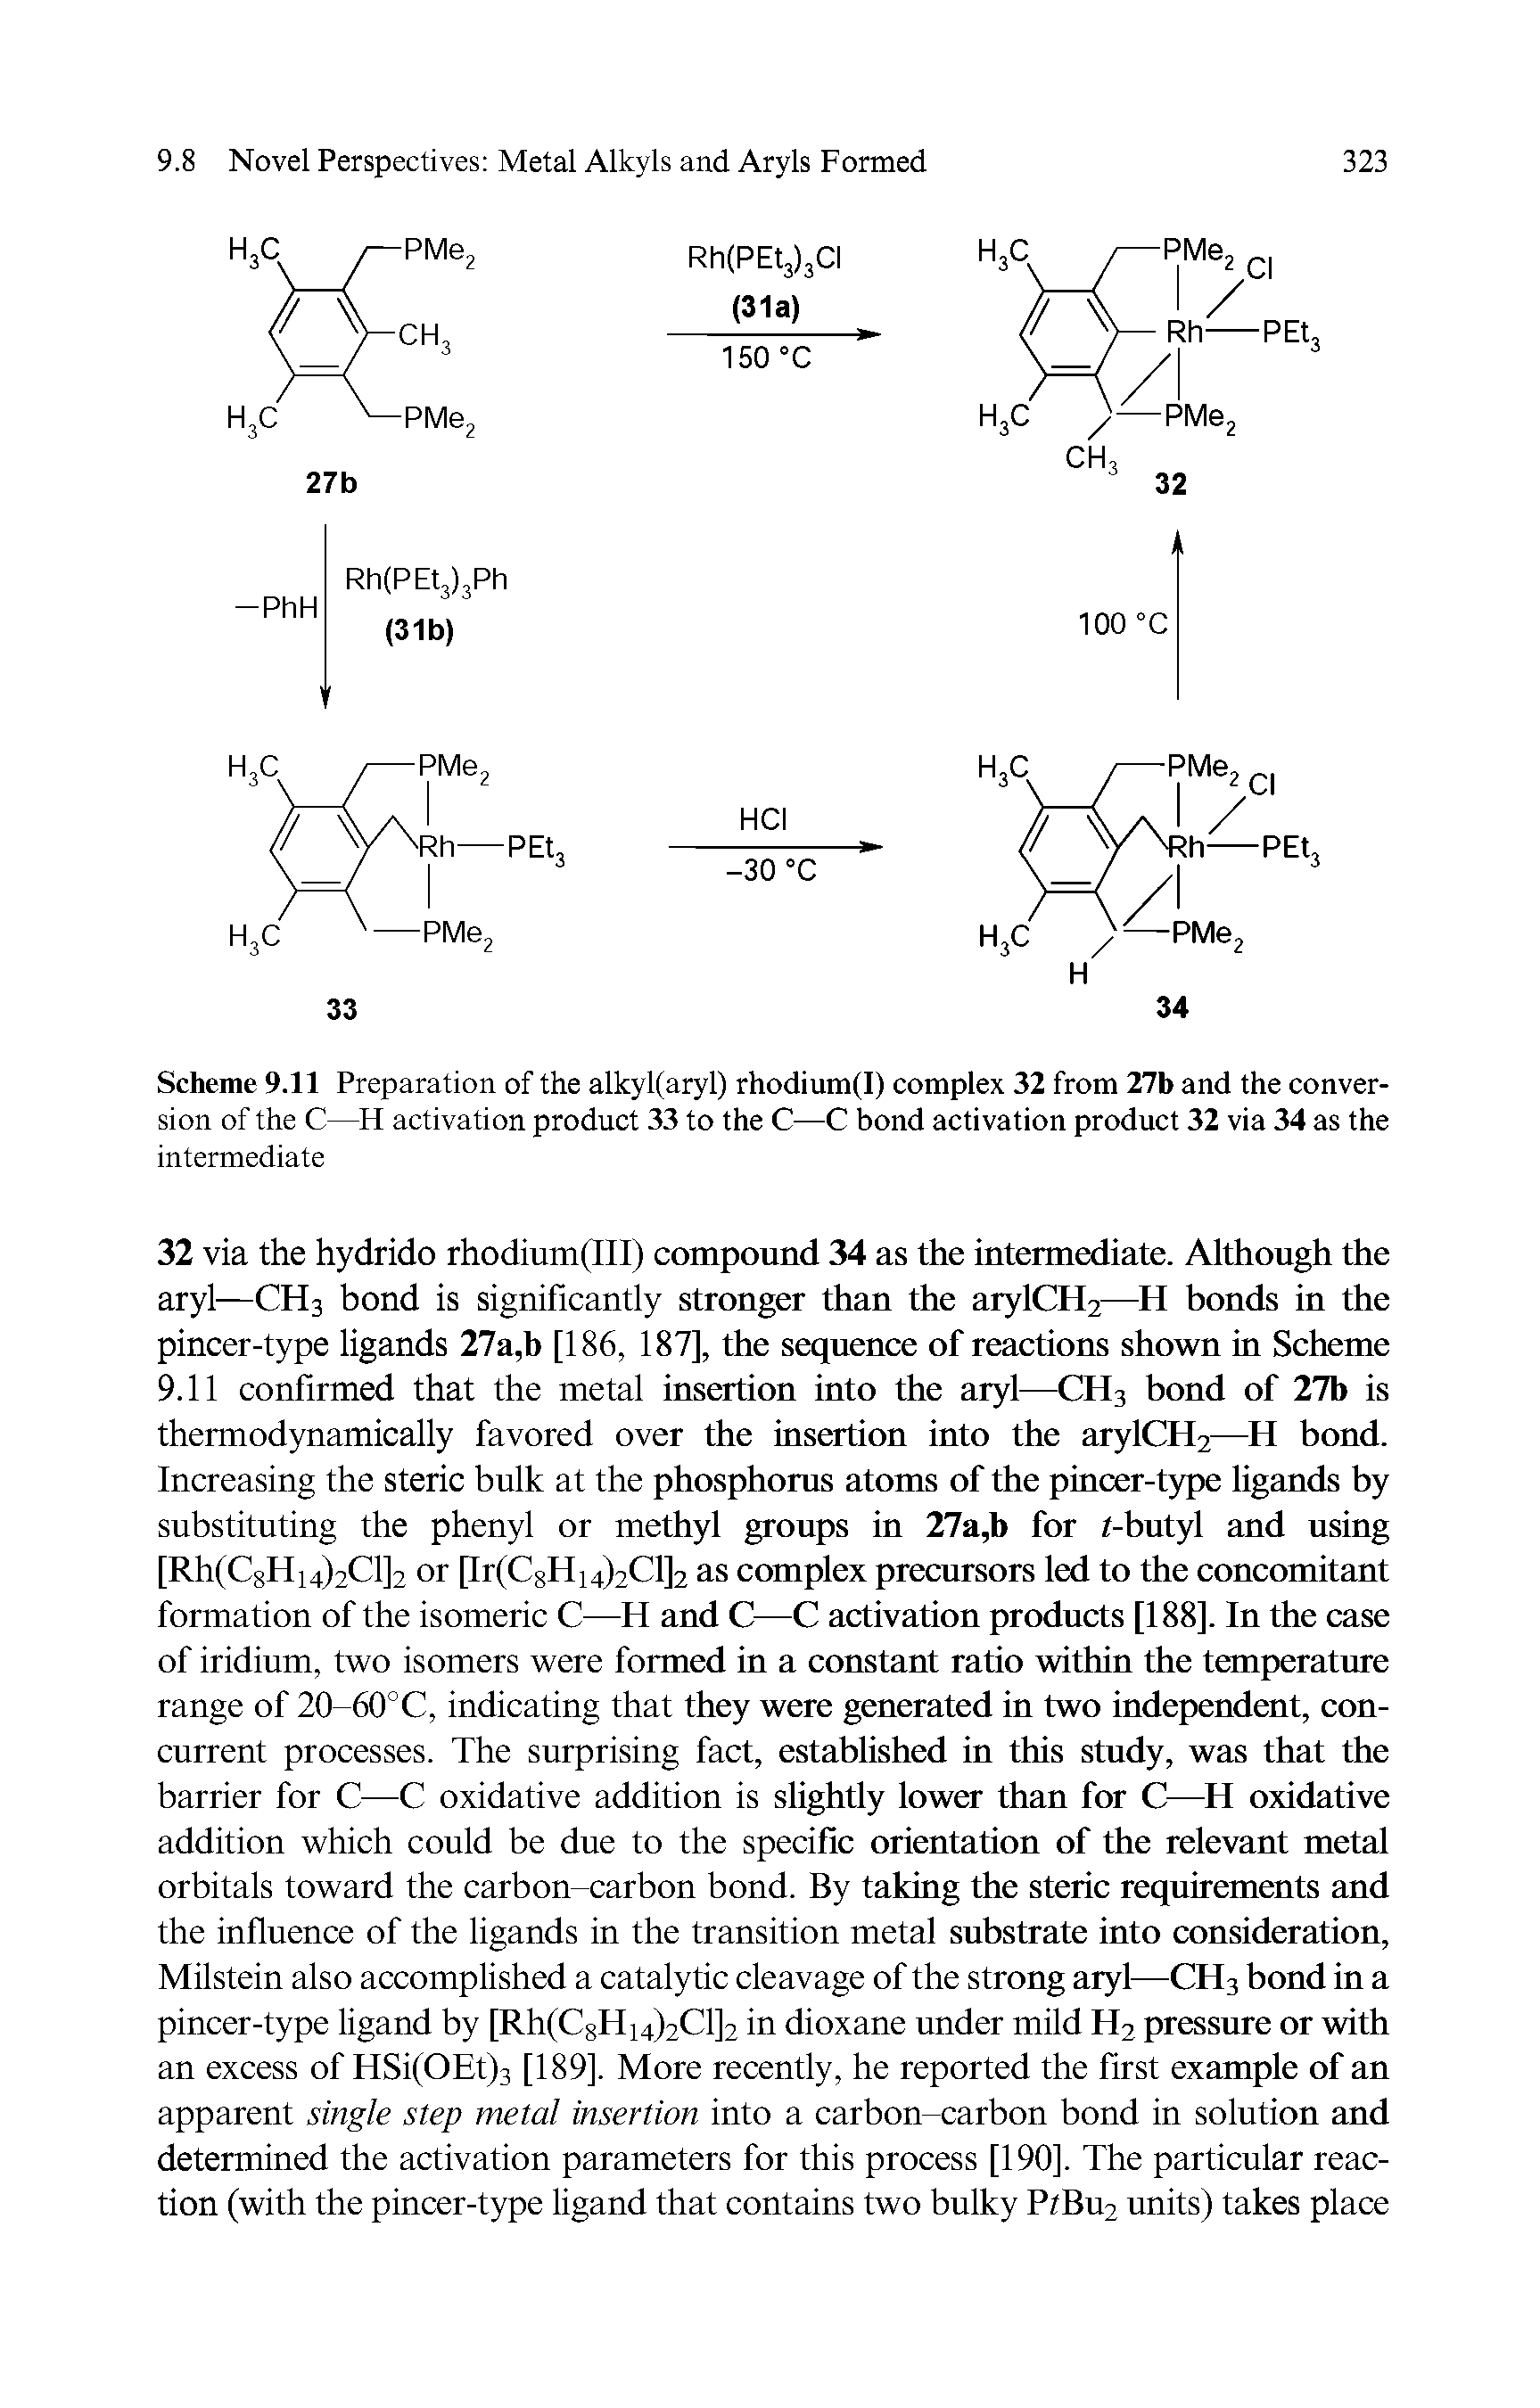 Scheme 9.11 Preparation of the alkyl(aryl) rhodium(I) complex 32 from 27b and the conversion of the C—H activation product 33 to the C—C bond activation product 32 via 34 as the...